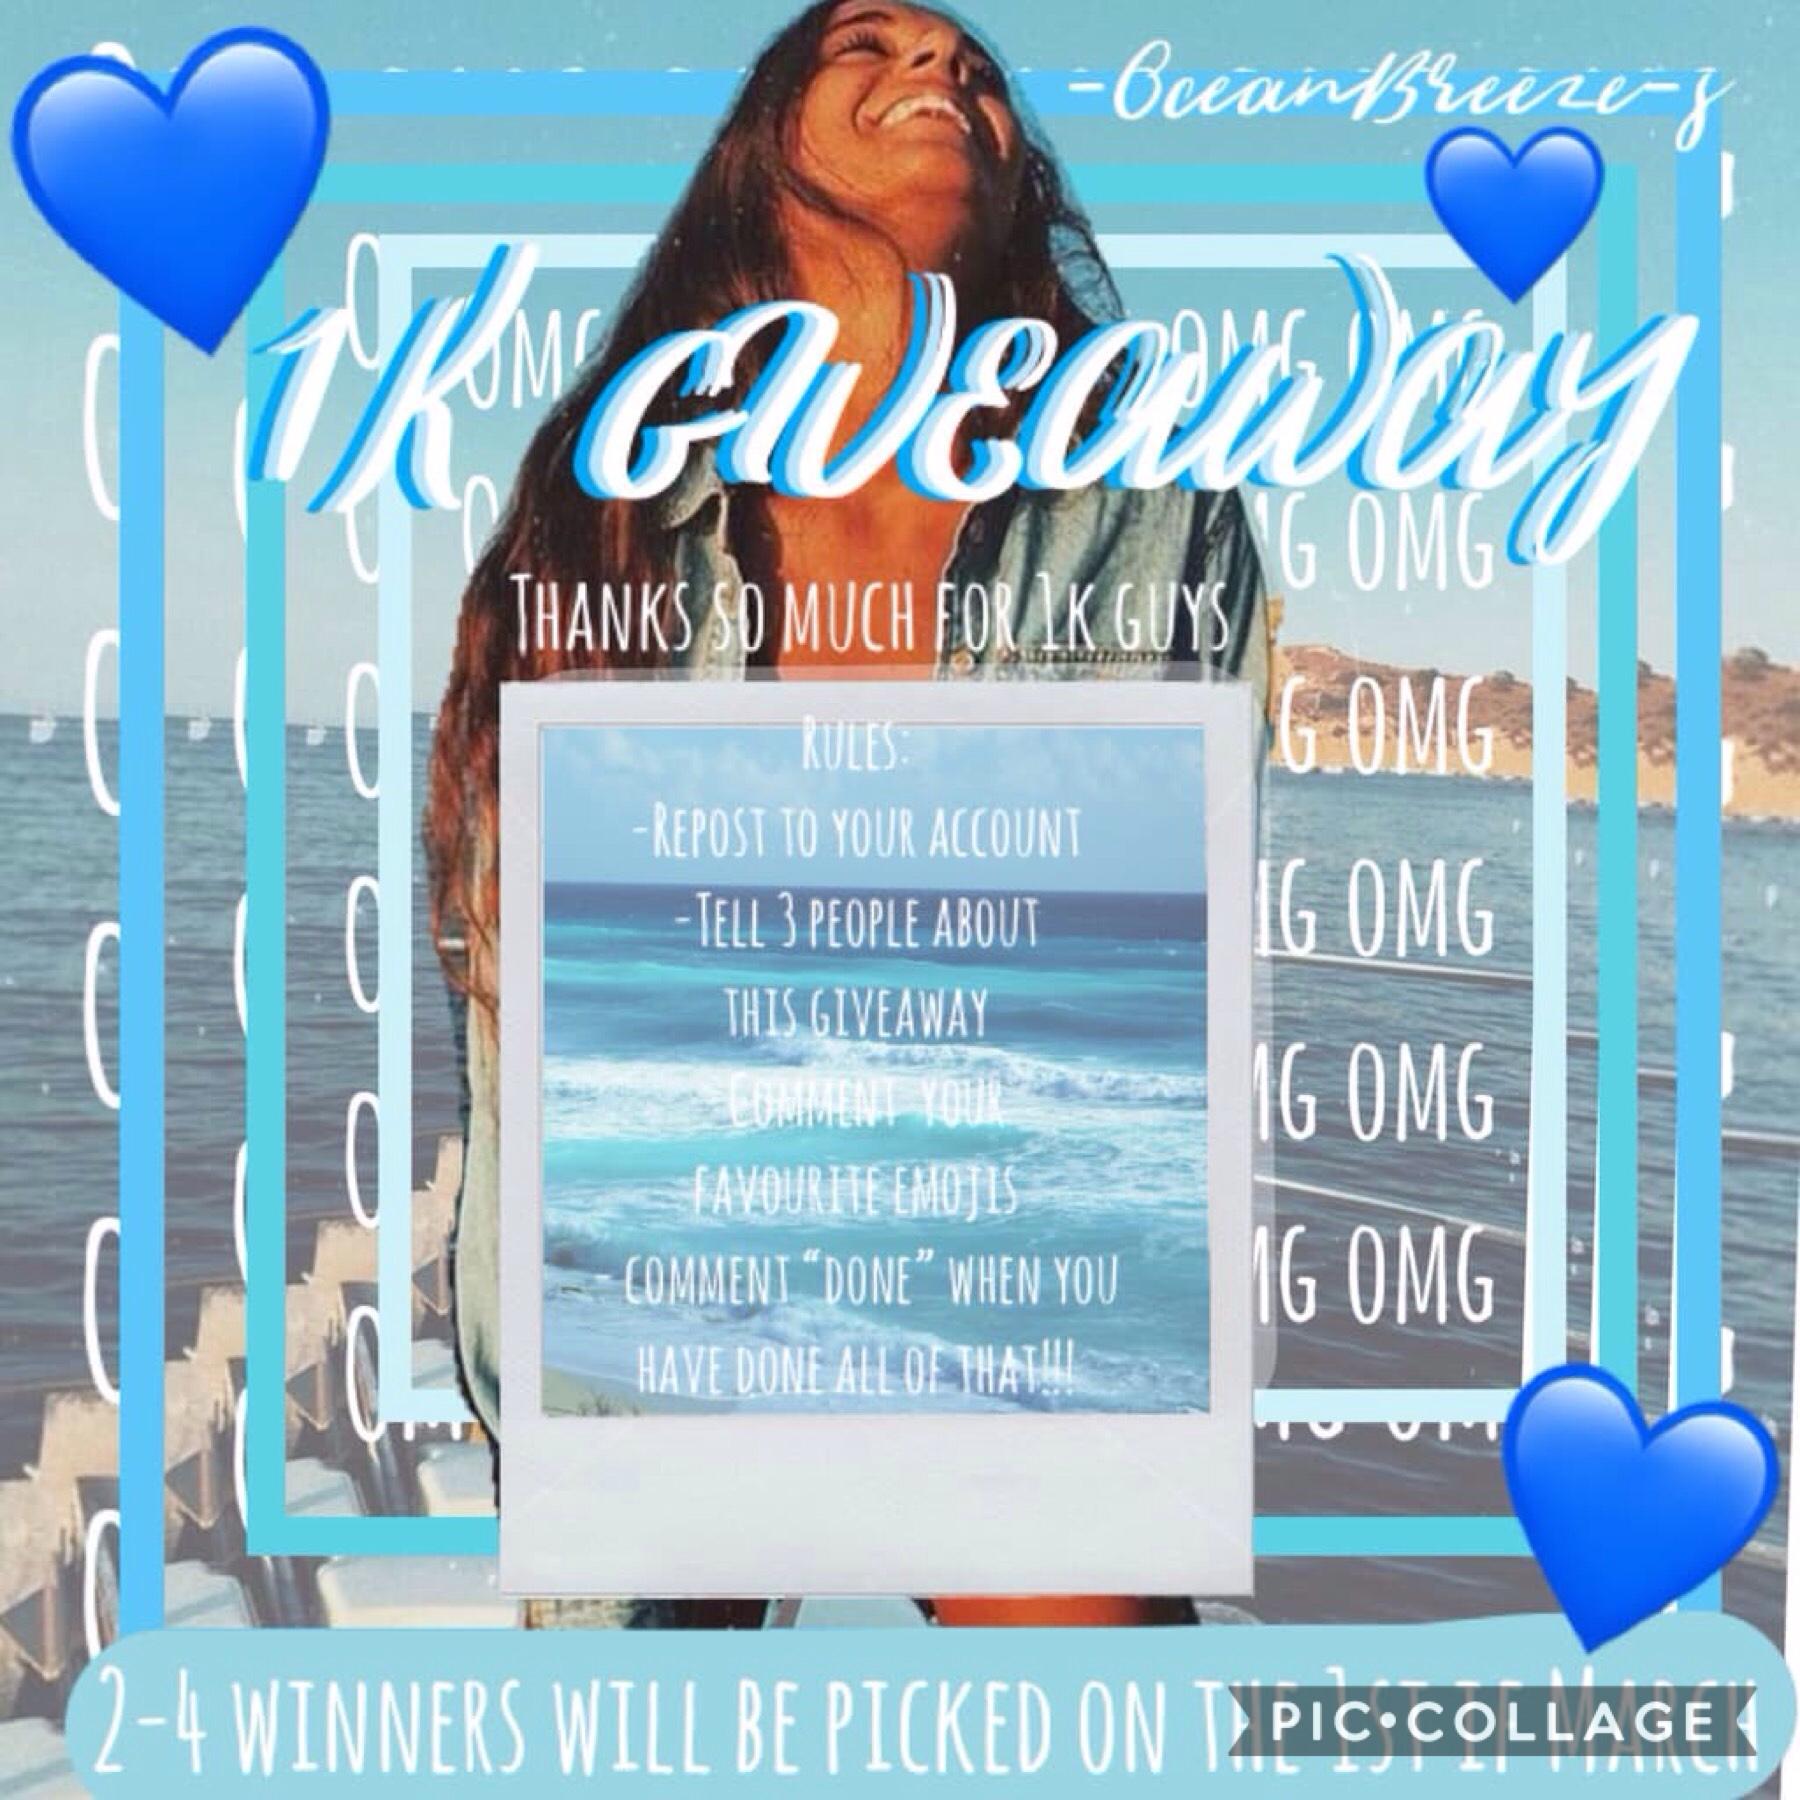 💙AHHHHHHHH CONGRATS MADDIE💙

Don't forget to enter my 1k giveaway!💜